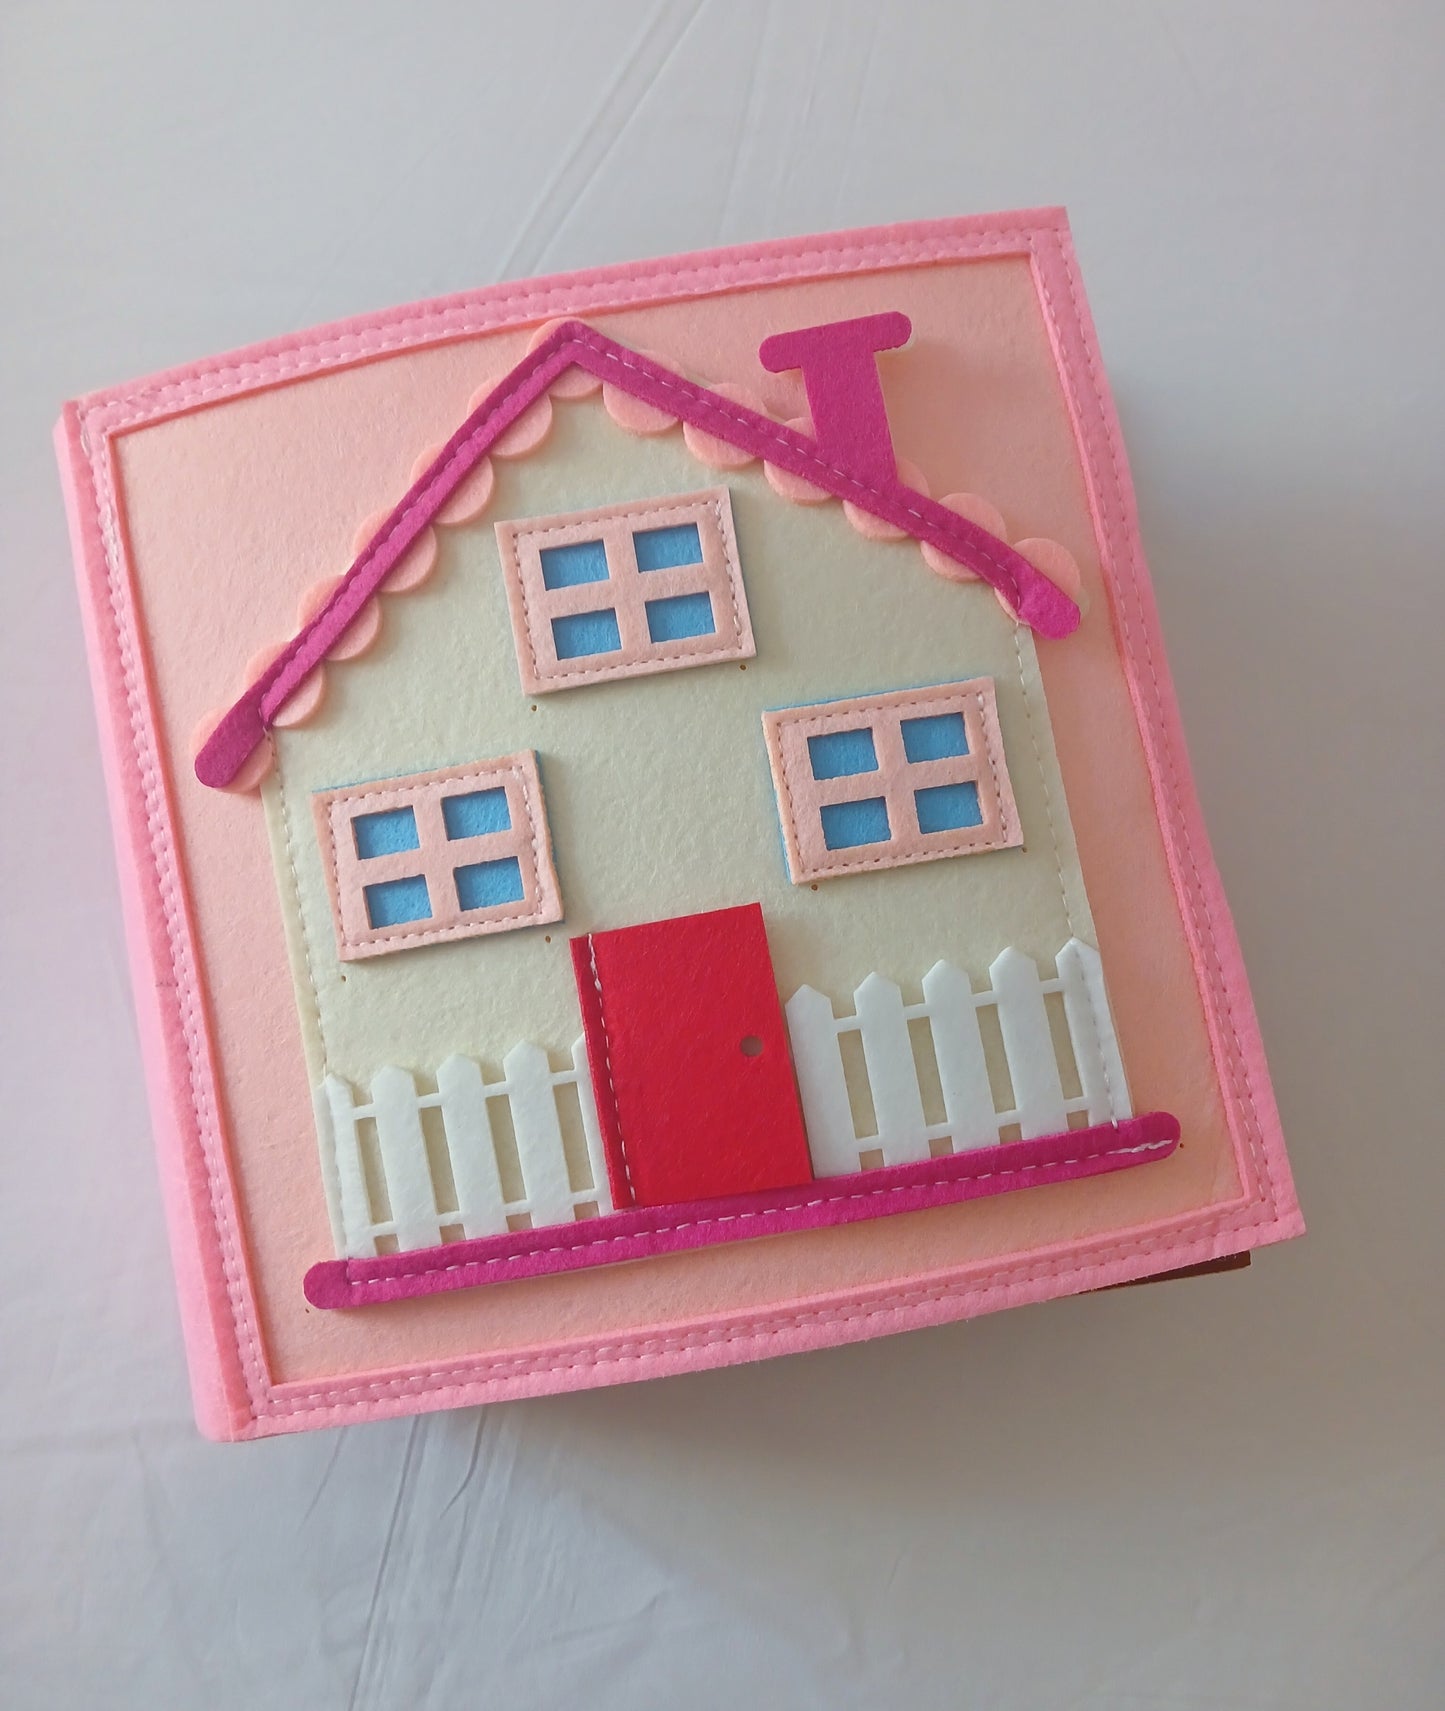 Doll House Busy Book